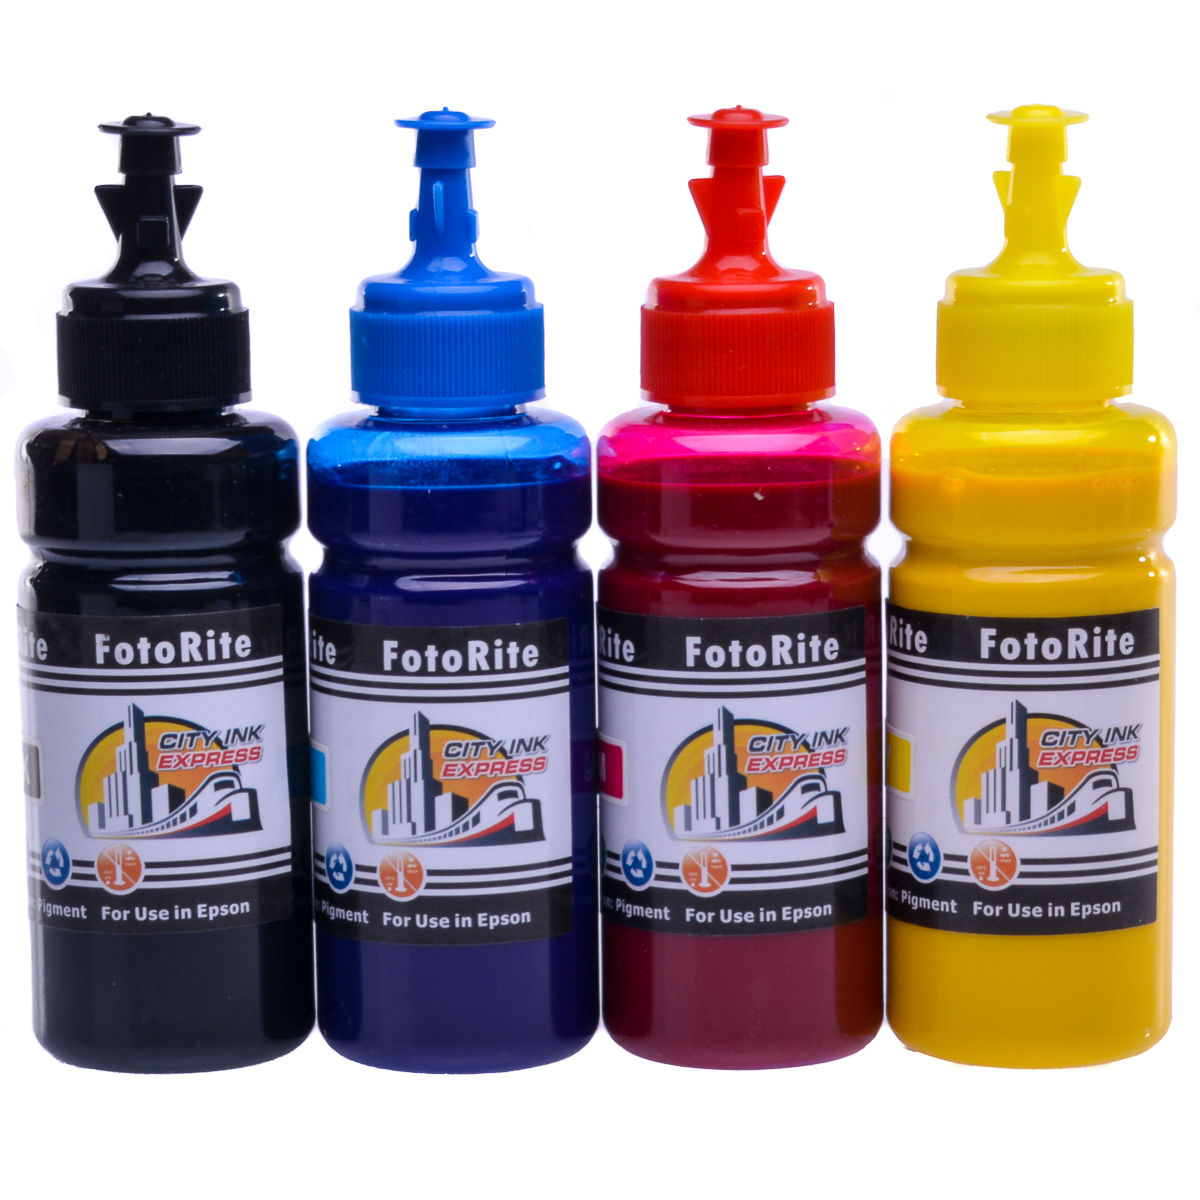 Cheap Multipack pigment ink refill replaces Epson XP-2205